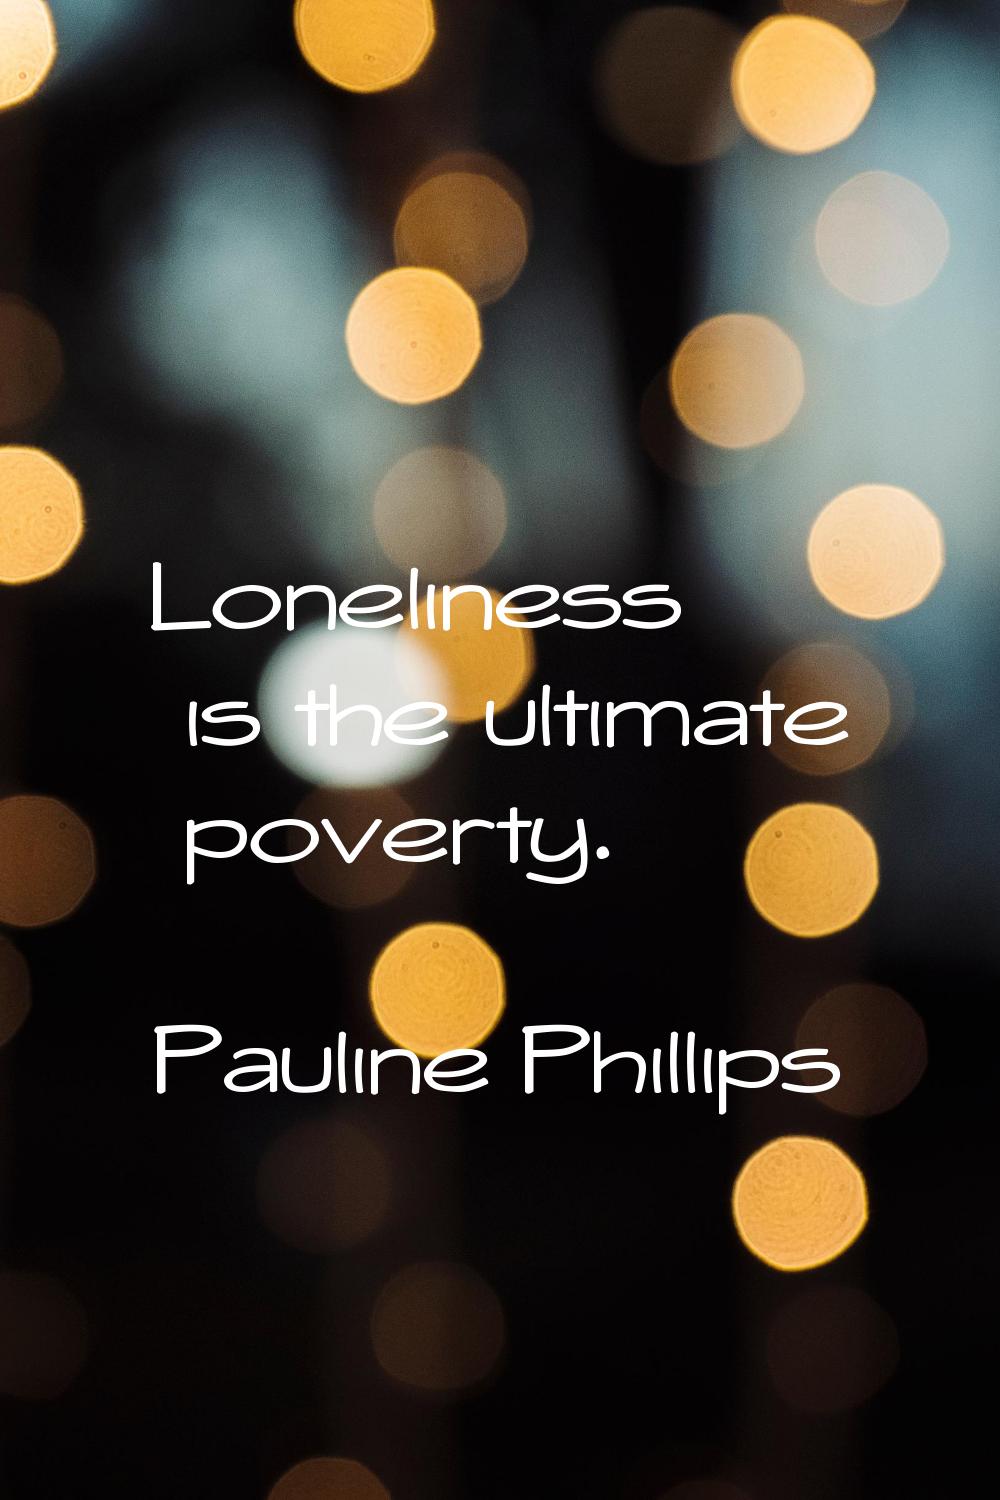 Loneliness is the ultimate poverty.